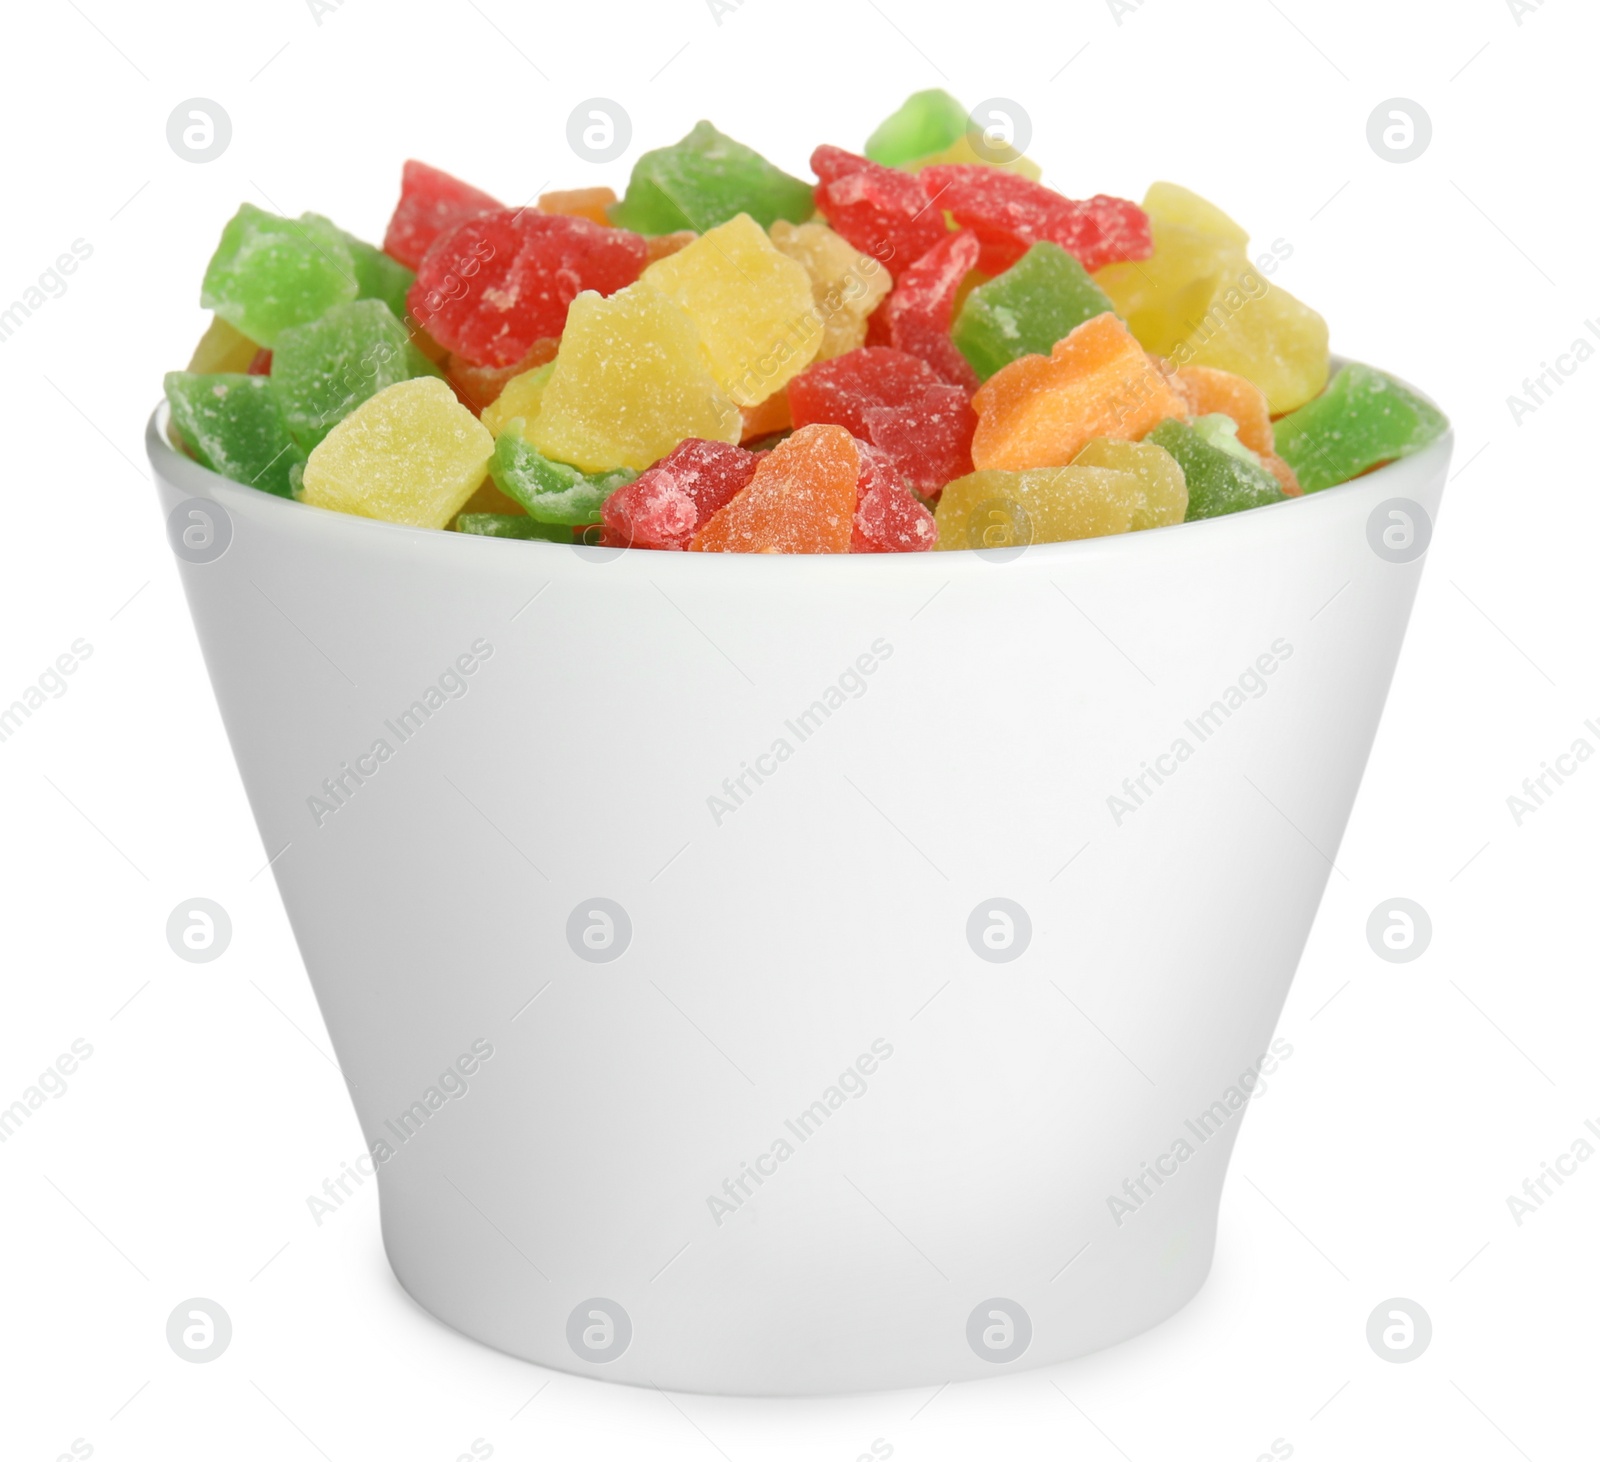 Photo of Mix of delicious candied fruits in bowl isolated on white